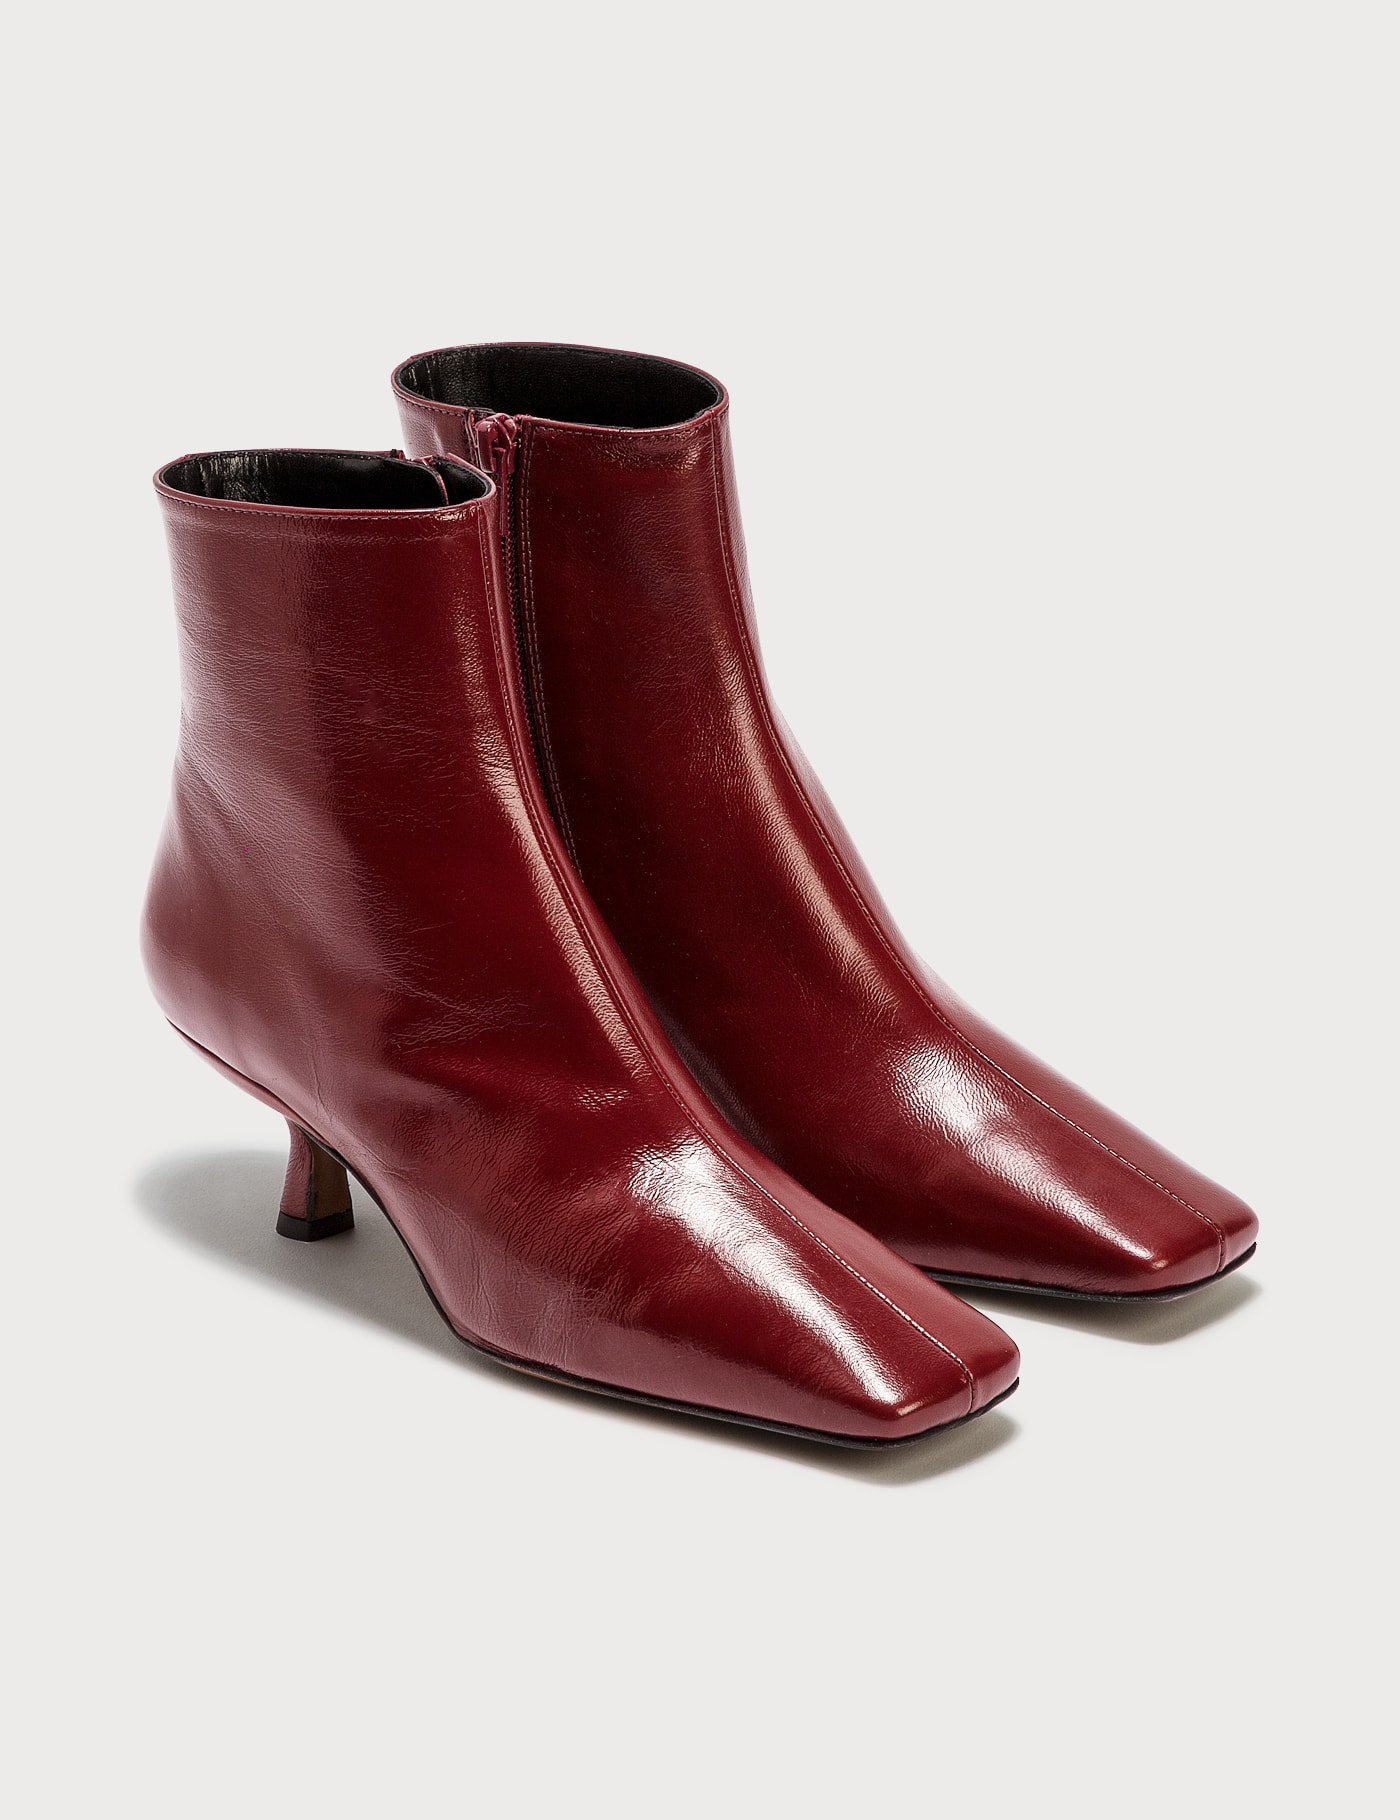 BY FAR LANGE BORDEAUX CREASED LEATHER BOOTS